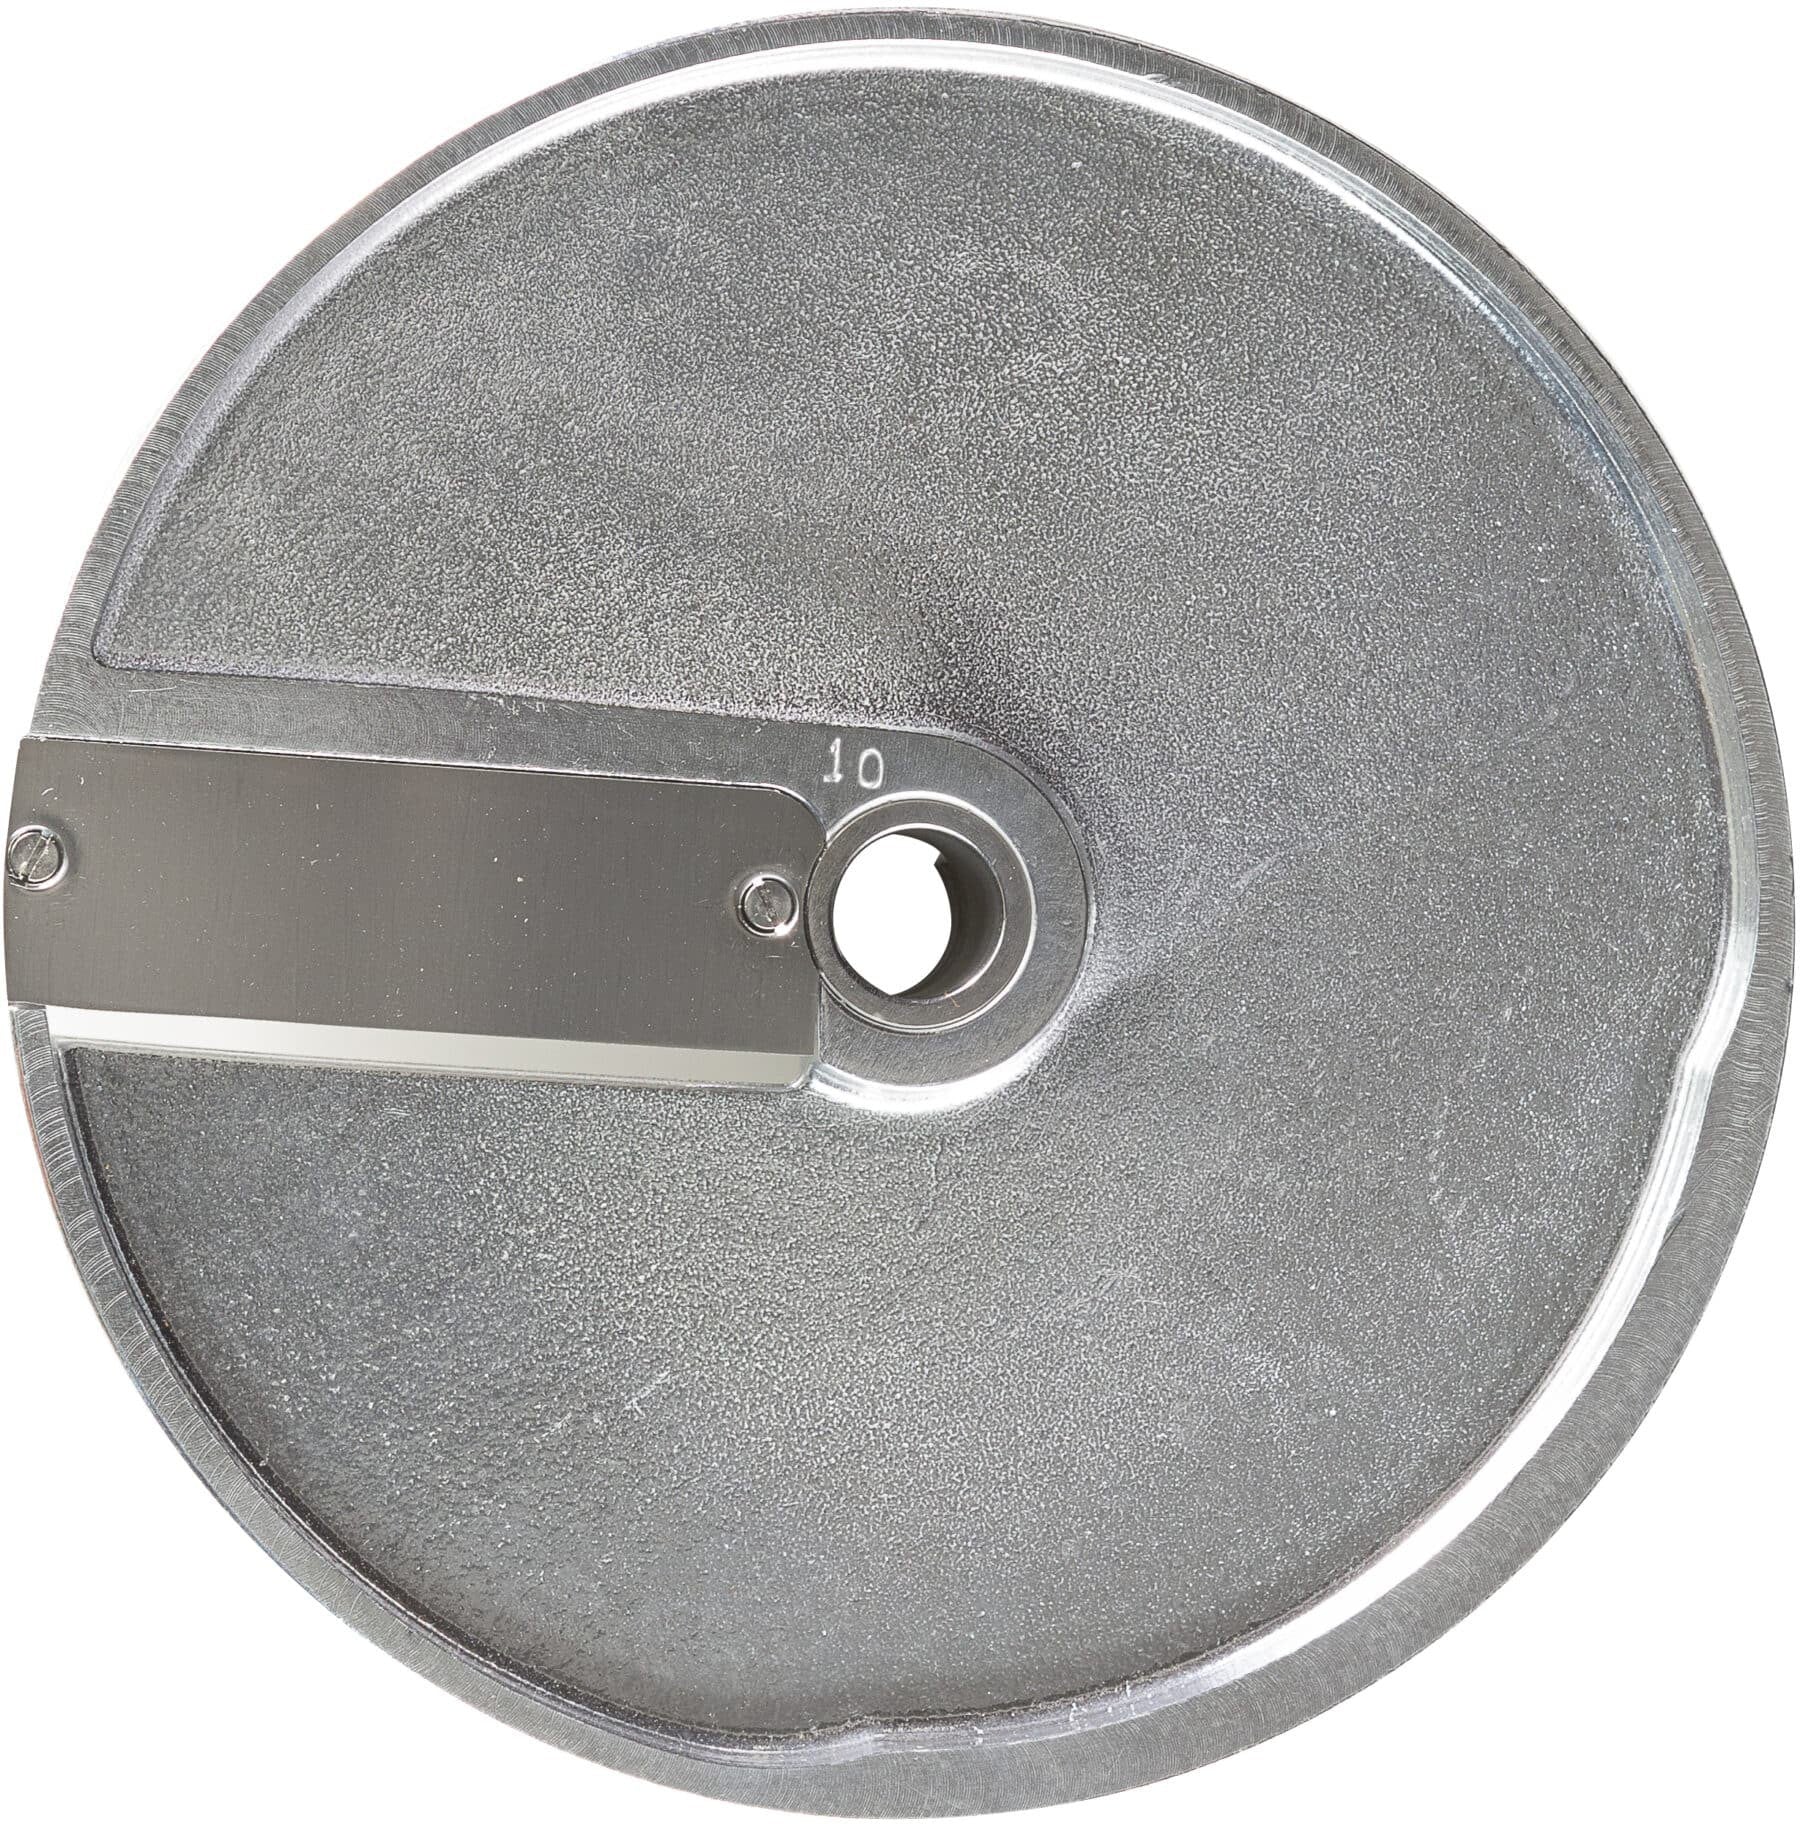 DITO SAMA - 0.31" Aluminum Pressing/Slicing Disc with Straight Blades for Dicing - 650116